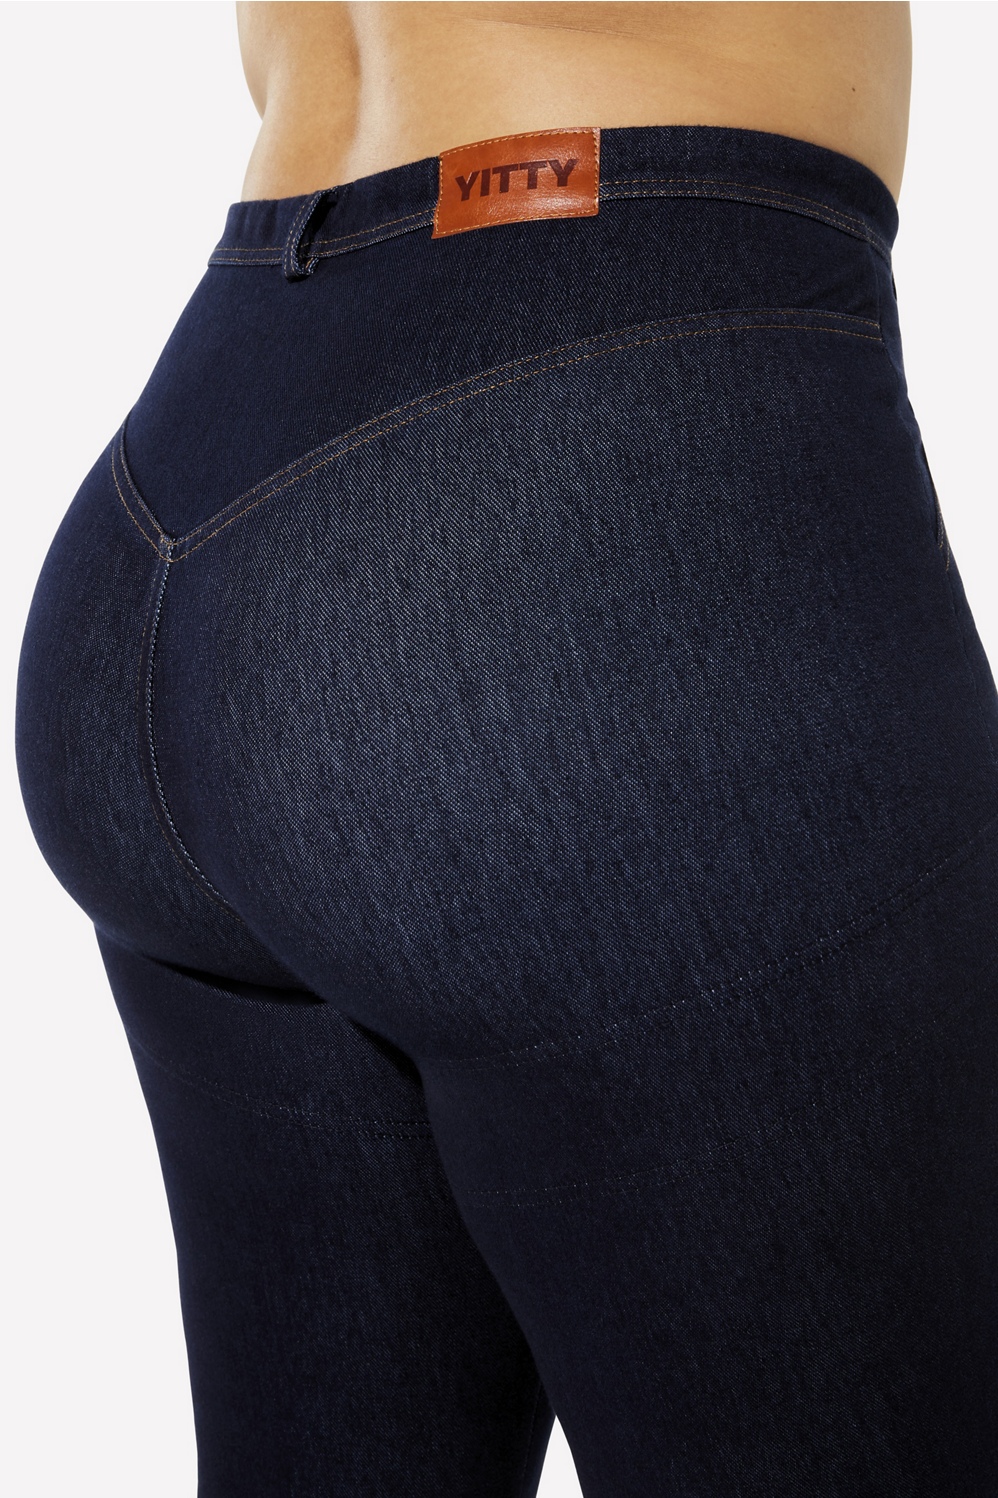 Jean Stretch Smoothing - Yitty Served Denim Is